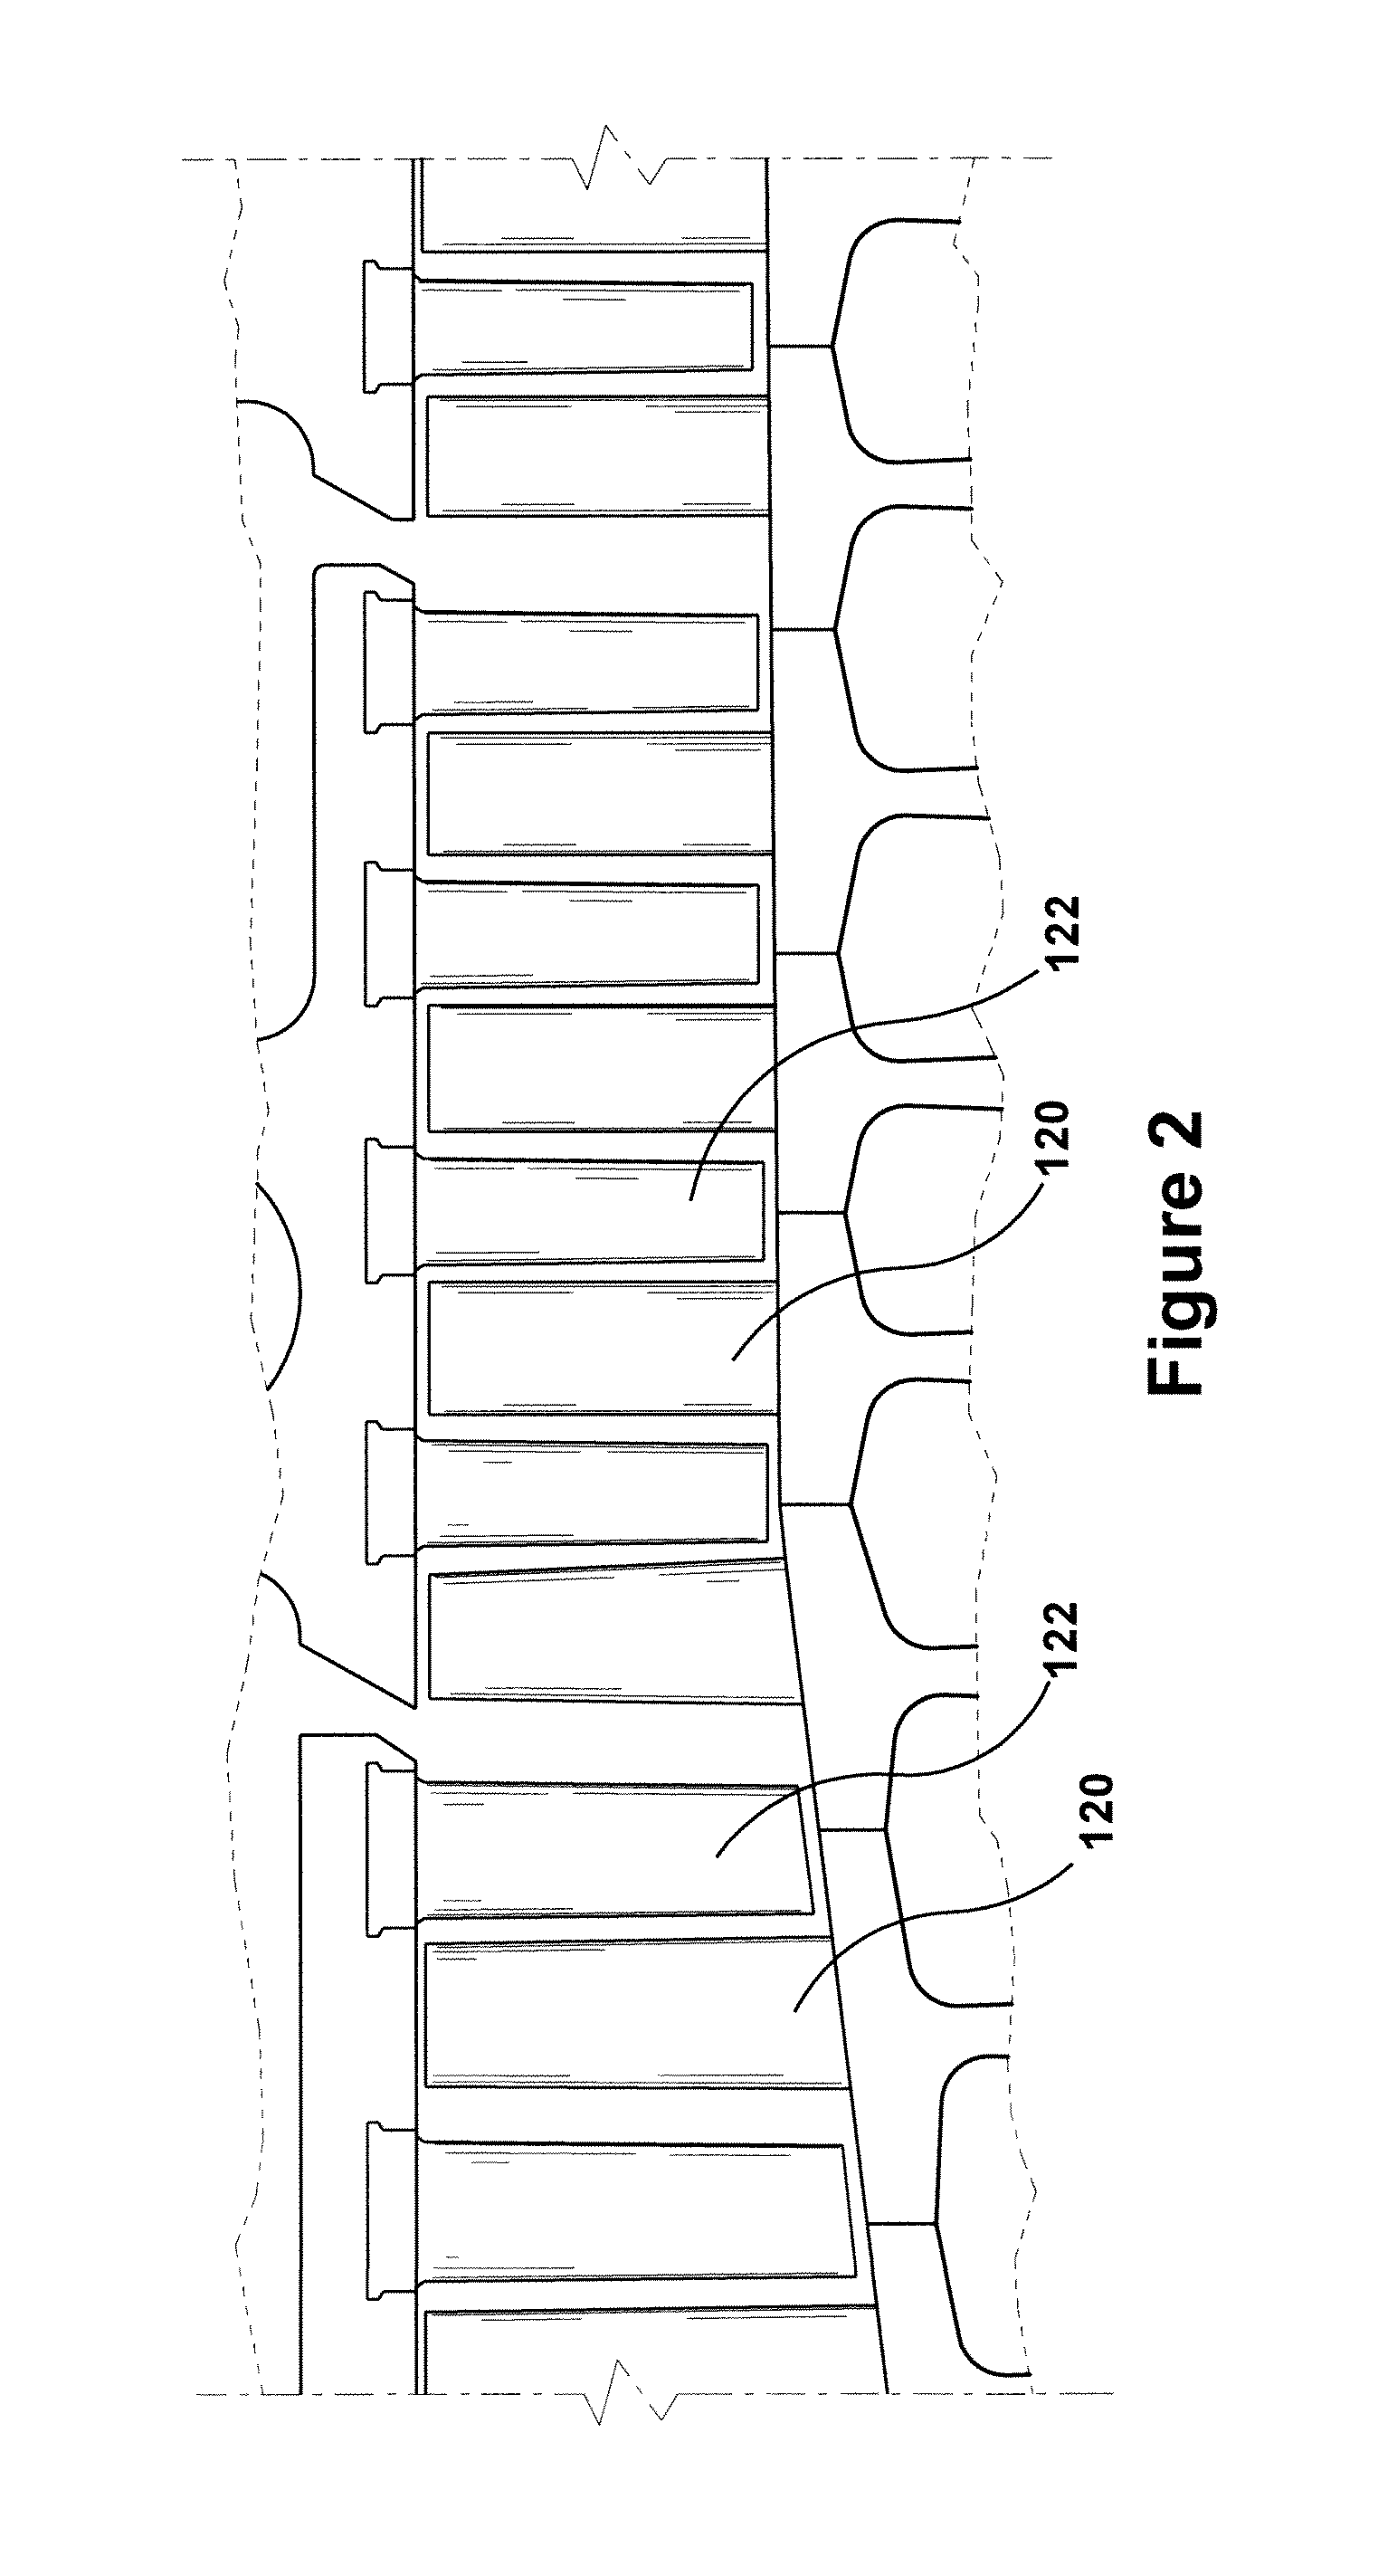 Methods, systems and apparatus for detecting material defects in combustors of combustion turbine engines